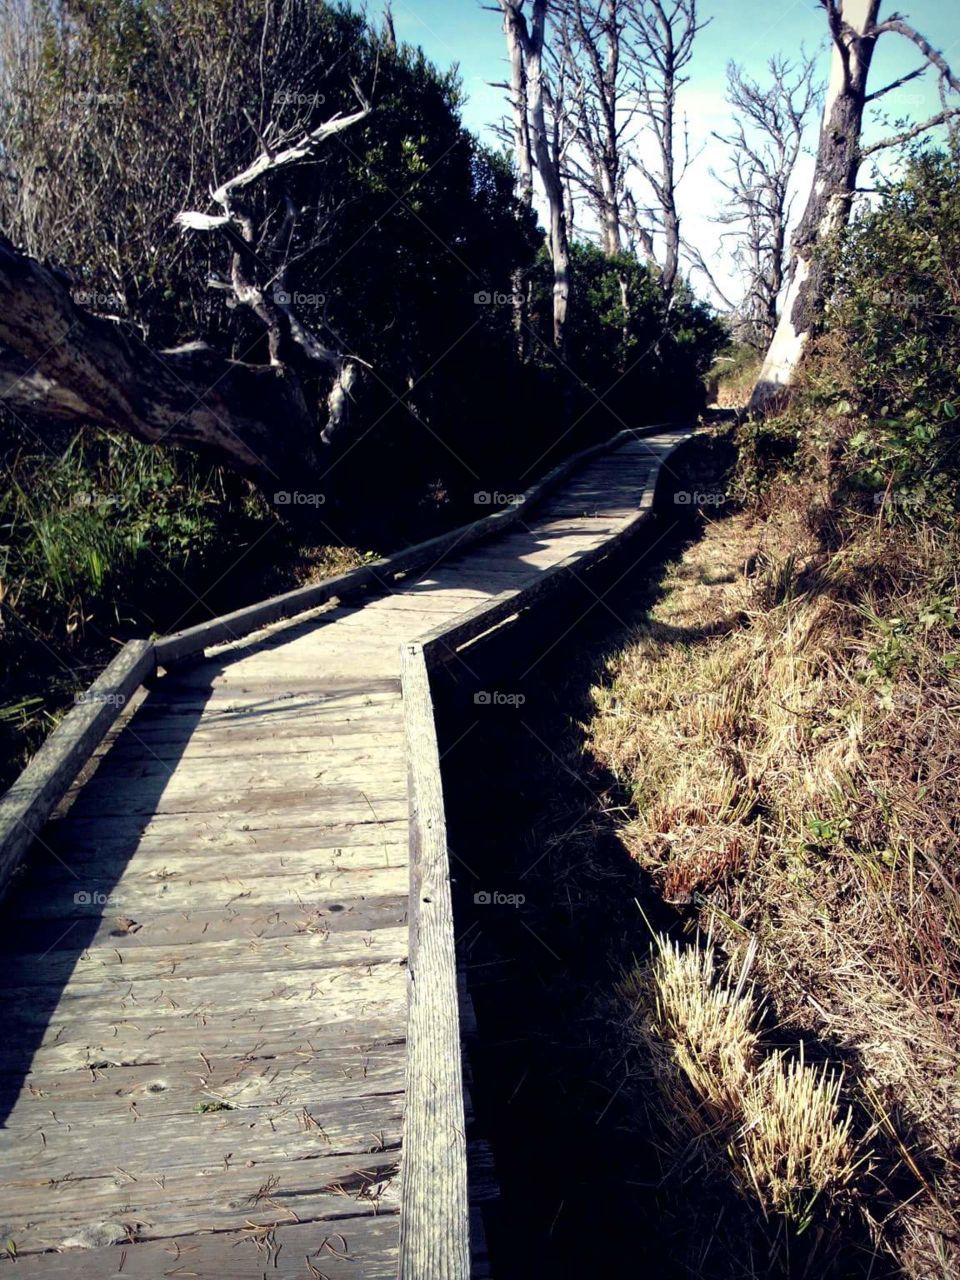 The best paths are the ones that are wooden, since dirt paths can easily be overgrown or lost (Fort Bragg, CA)